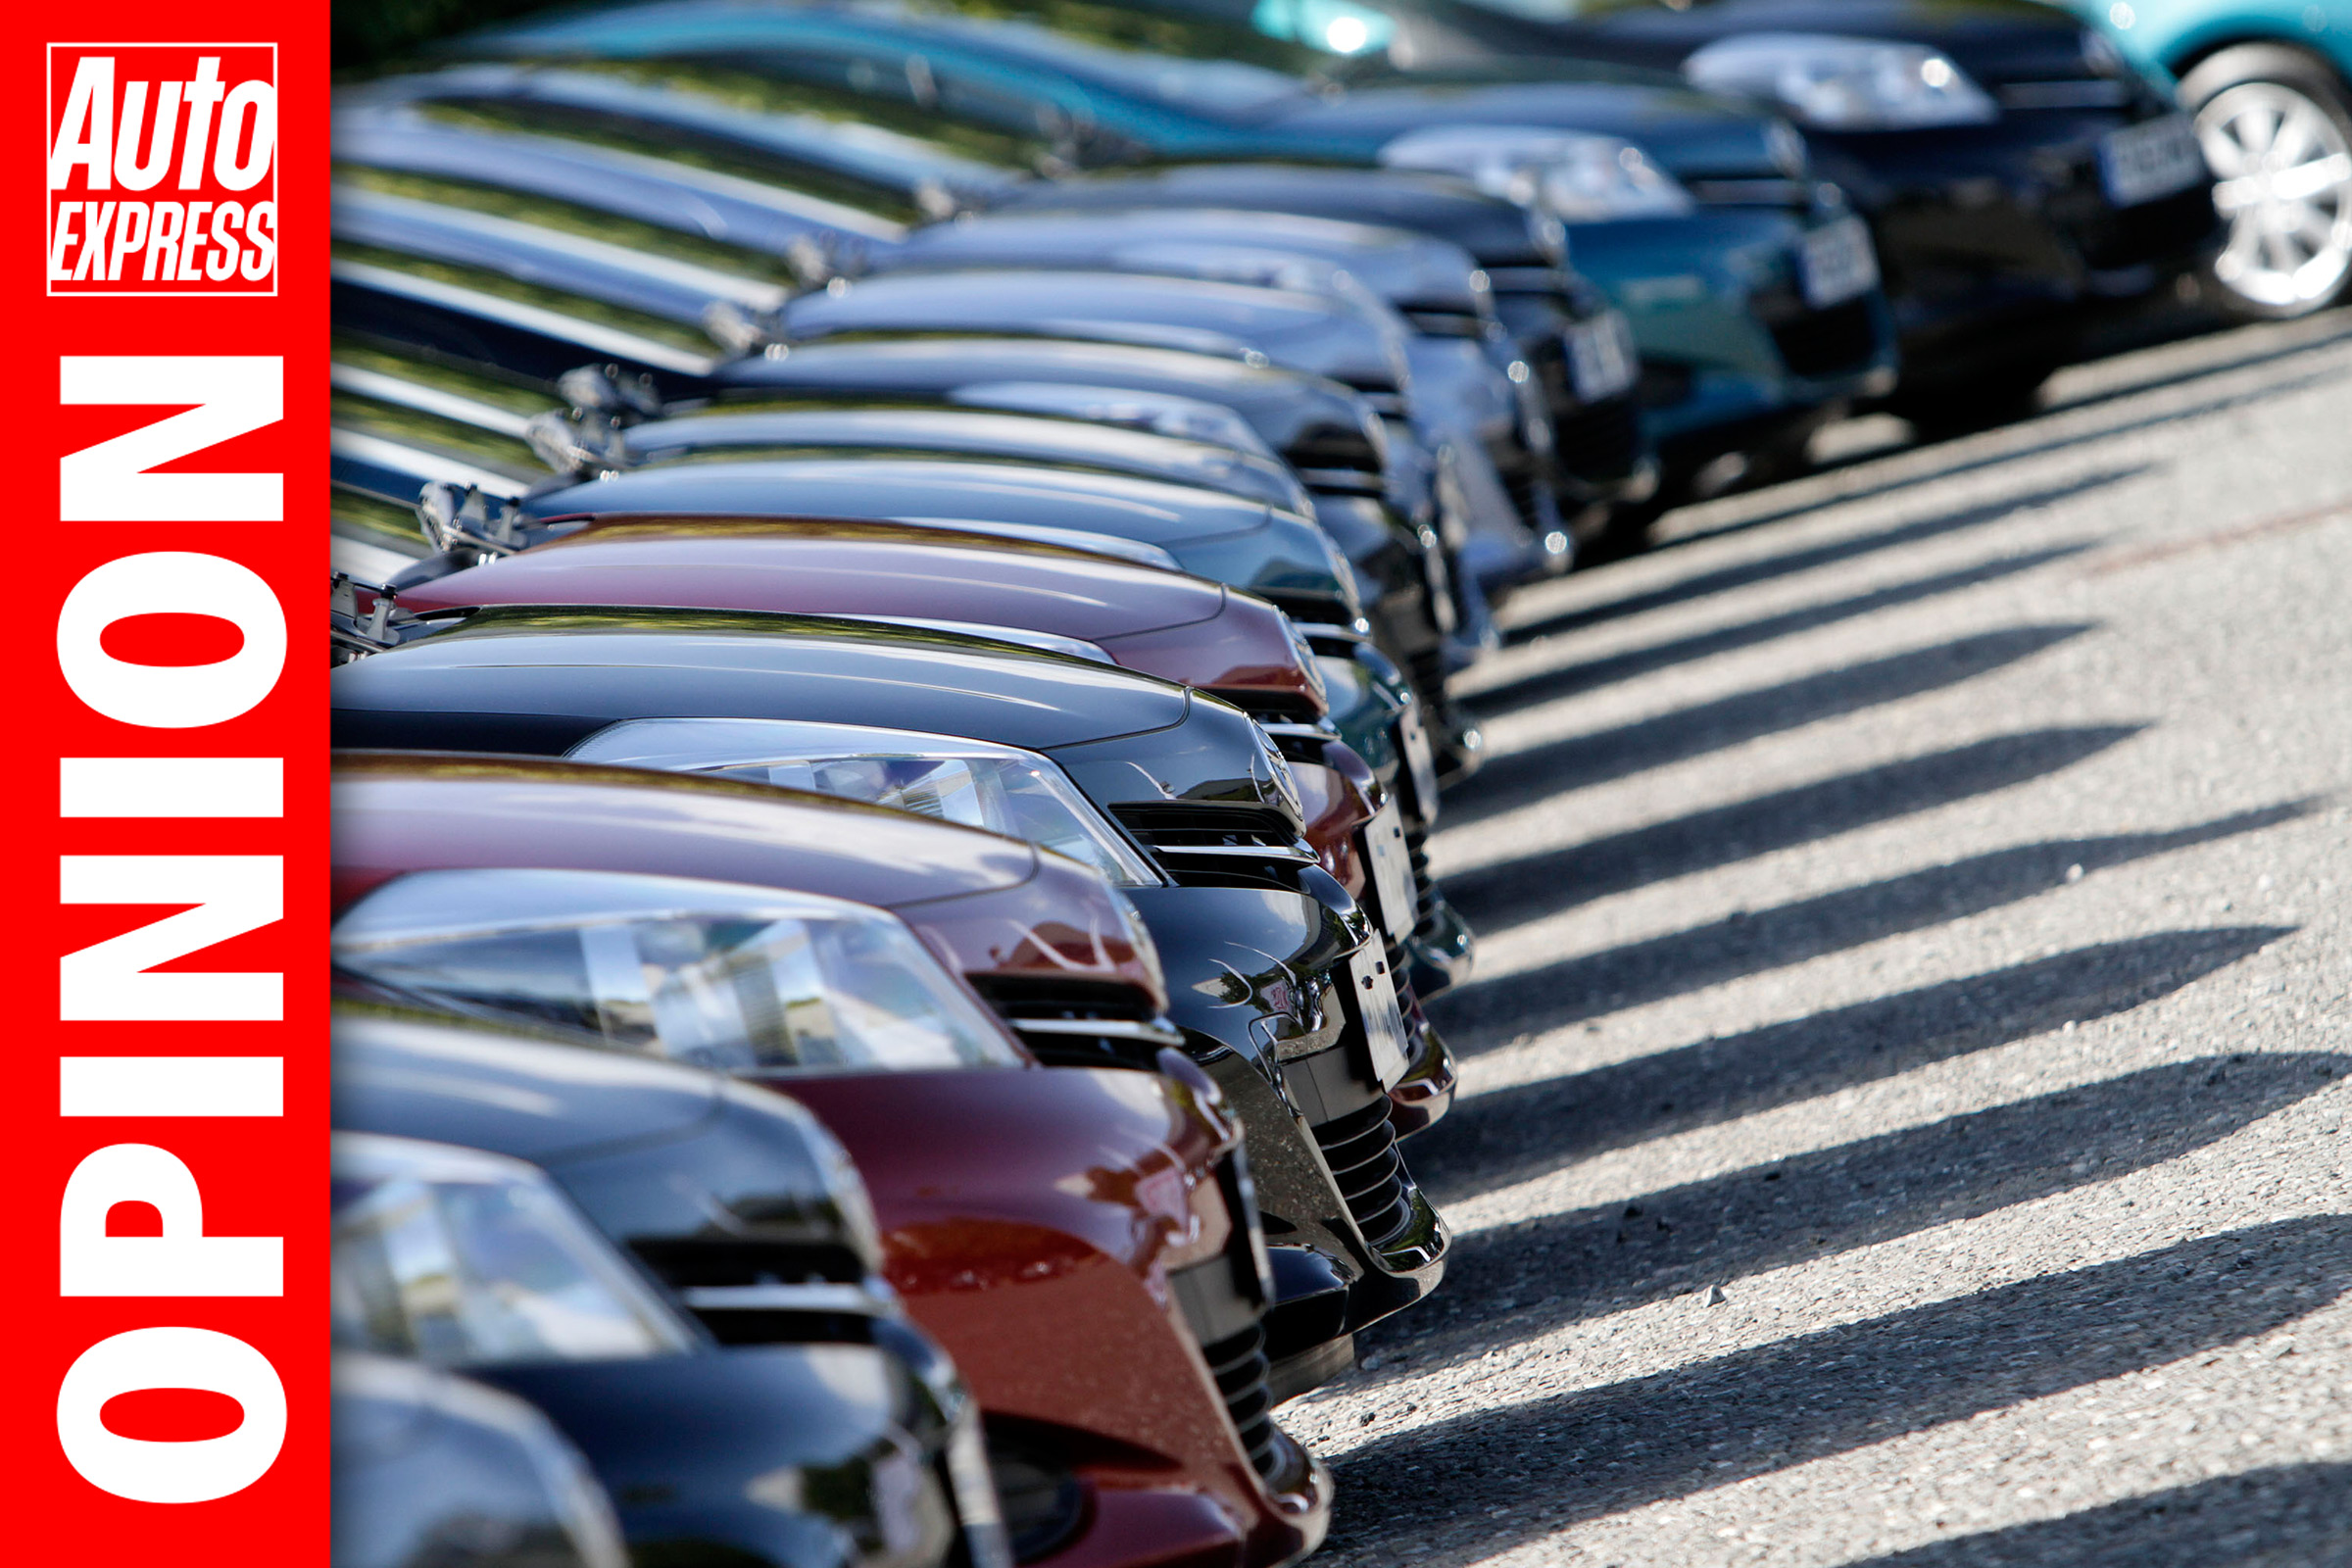 'The UK's car retail trade lags behind the vibrant the 